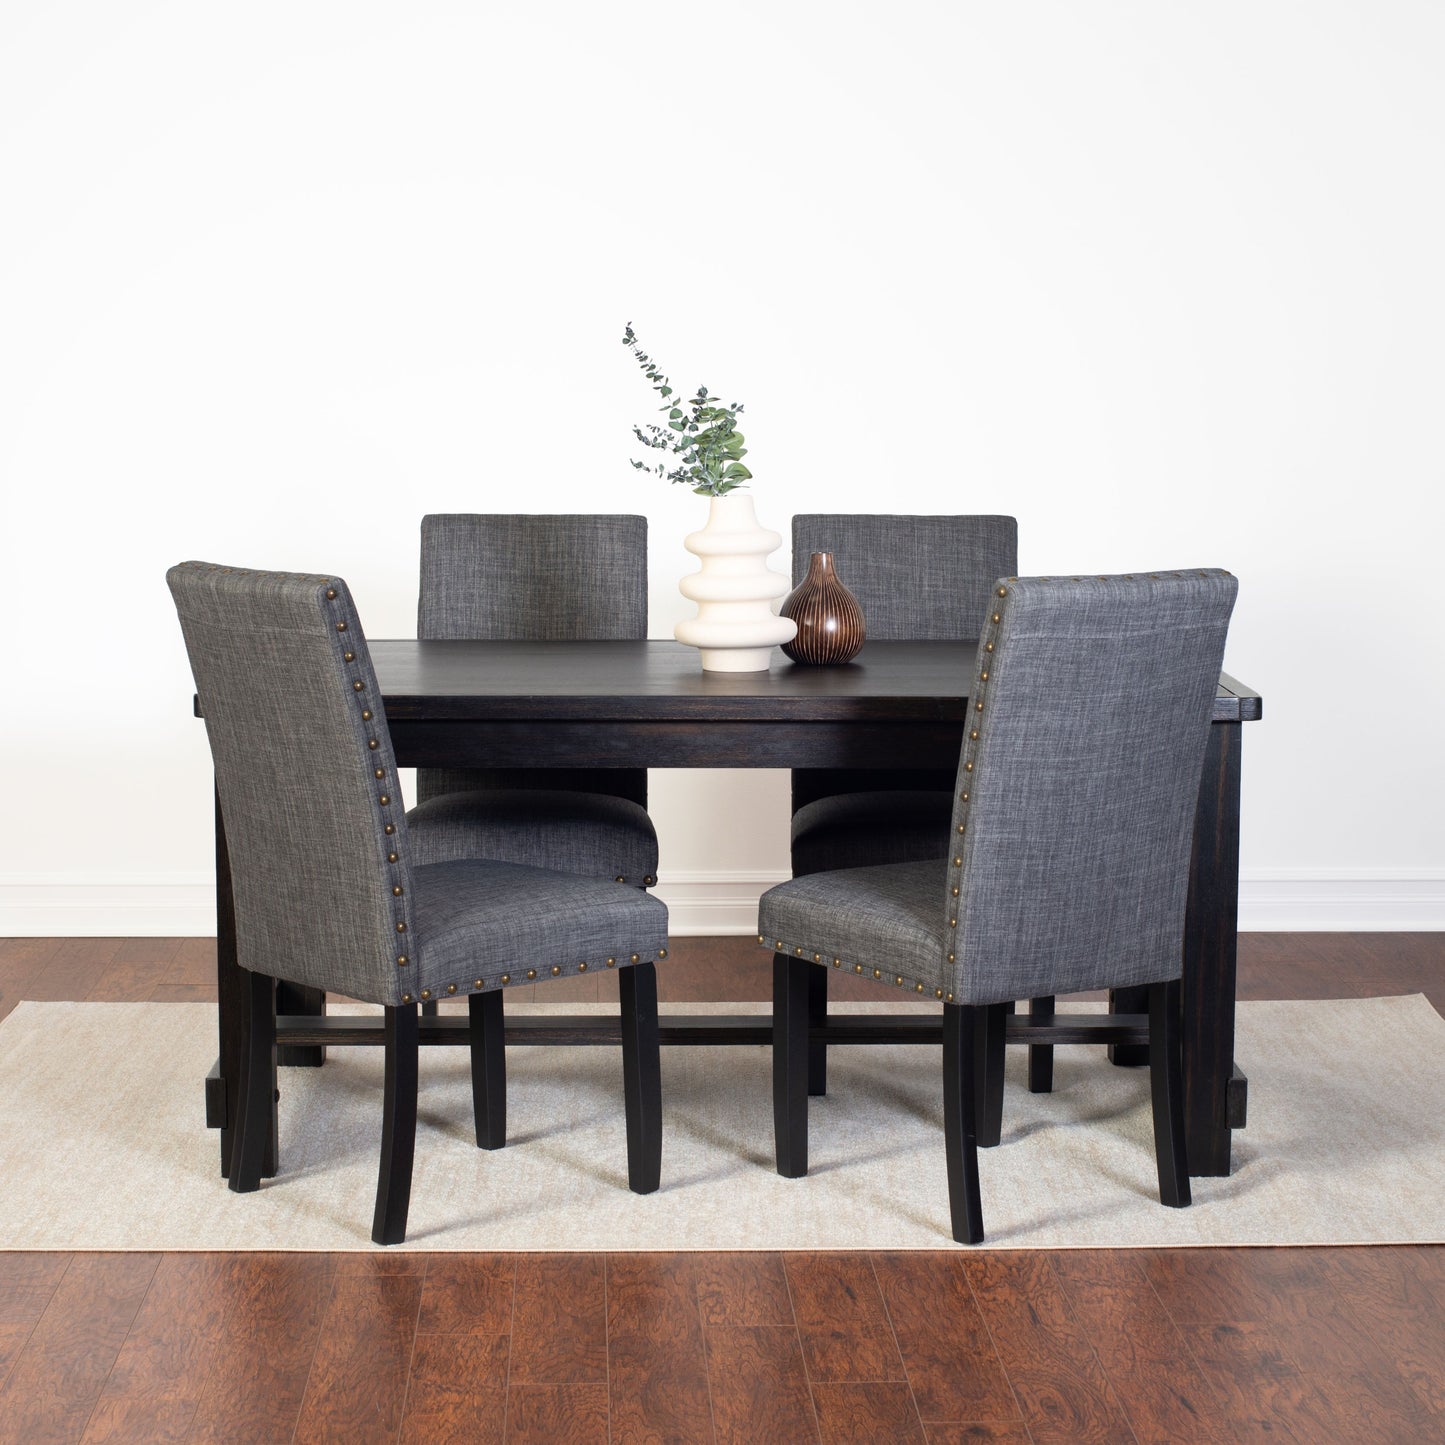 Muzzi Contemporary 5-Piece Dining Set, Dining Table with 4 Stylish Chairs